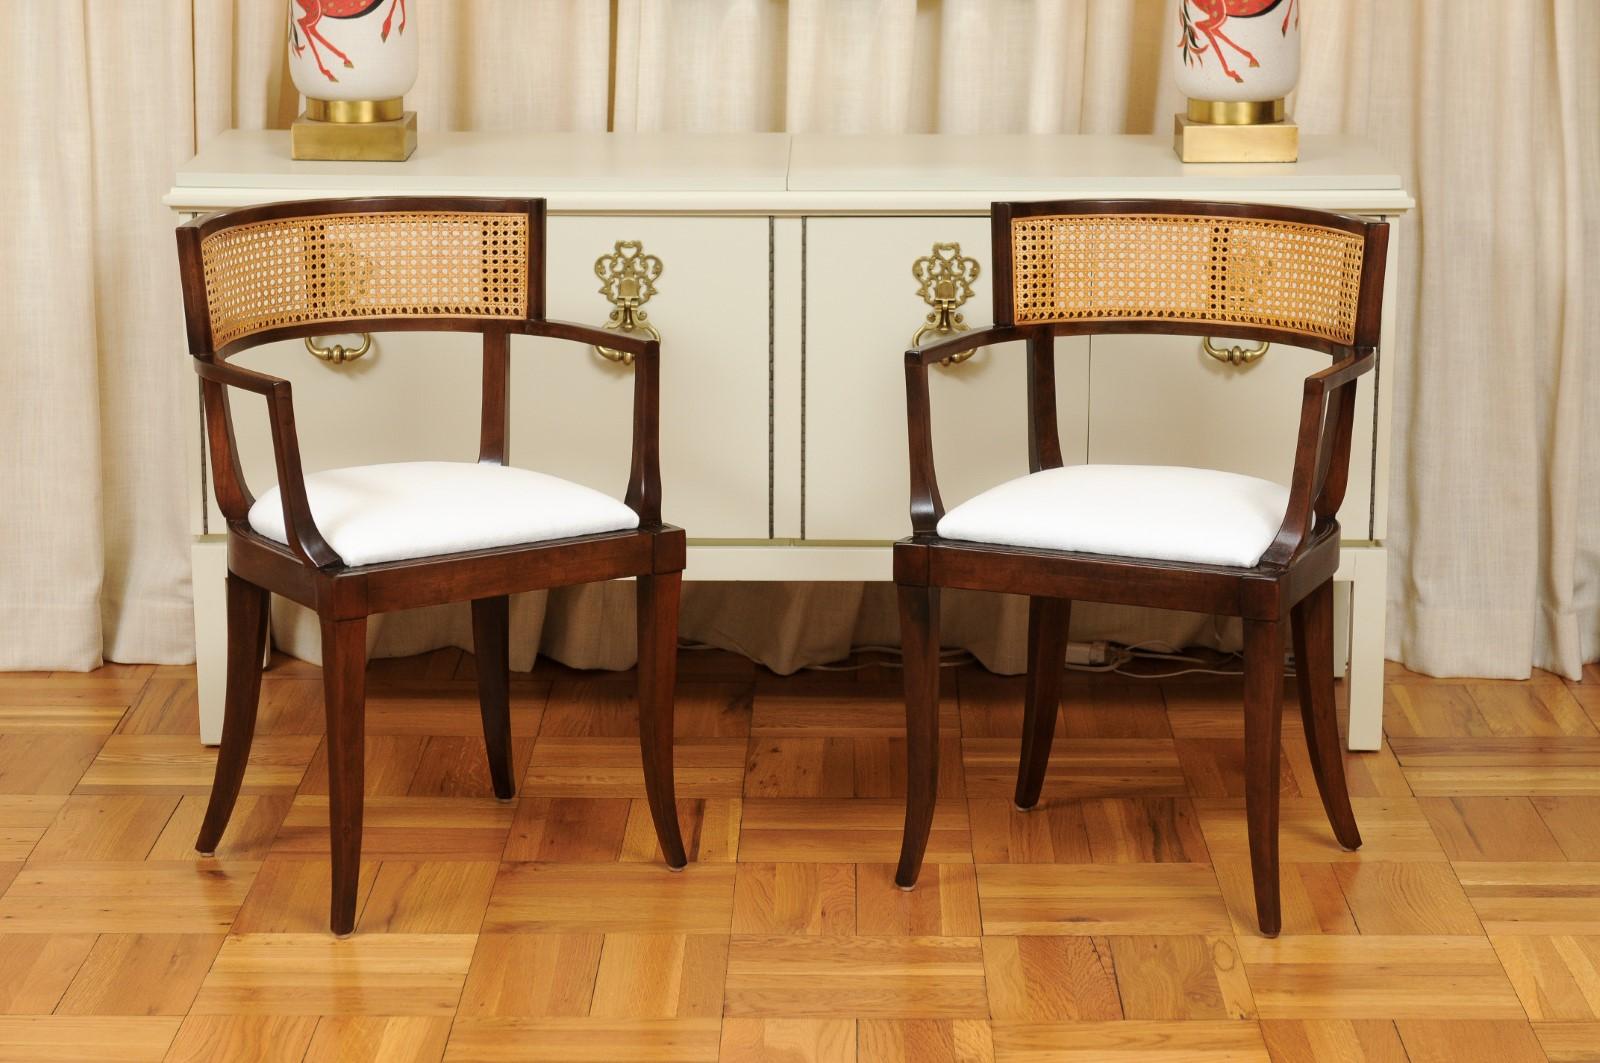 All Arm, Exquisite Set of 8 Klismos Cane Dining Chairs by Baker, circa 1958 For Sale 12